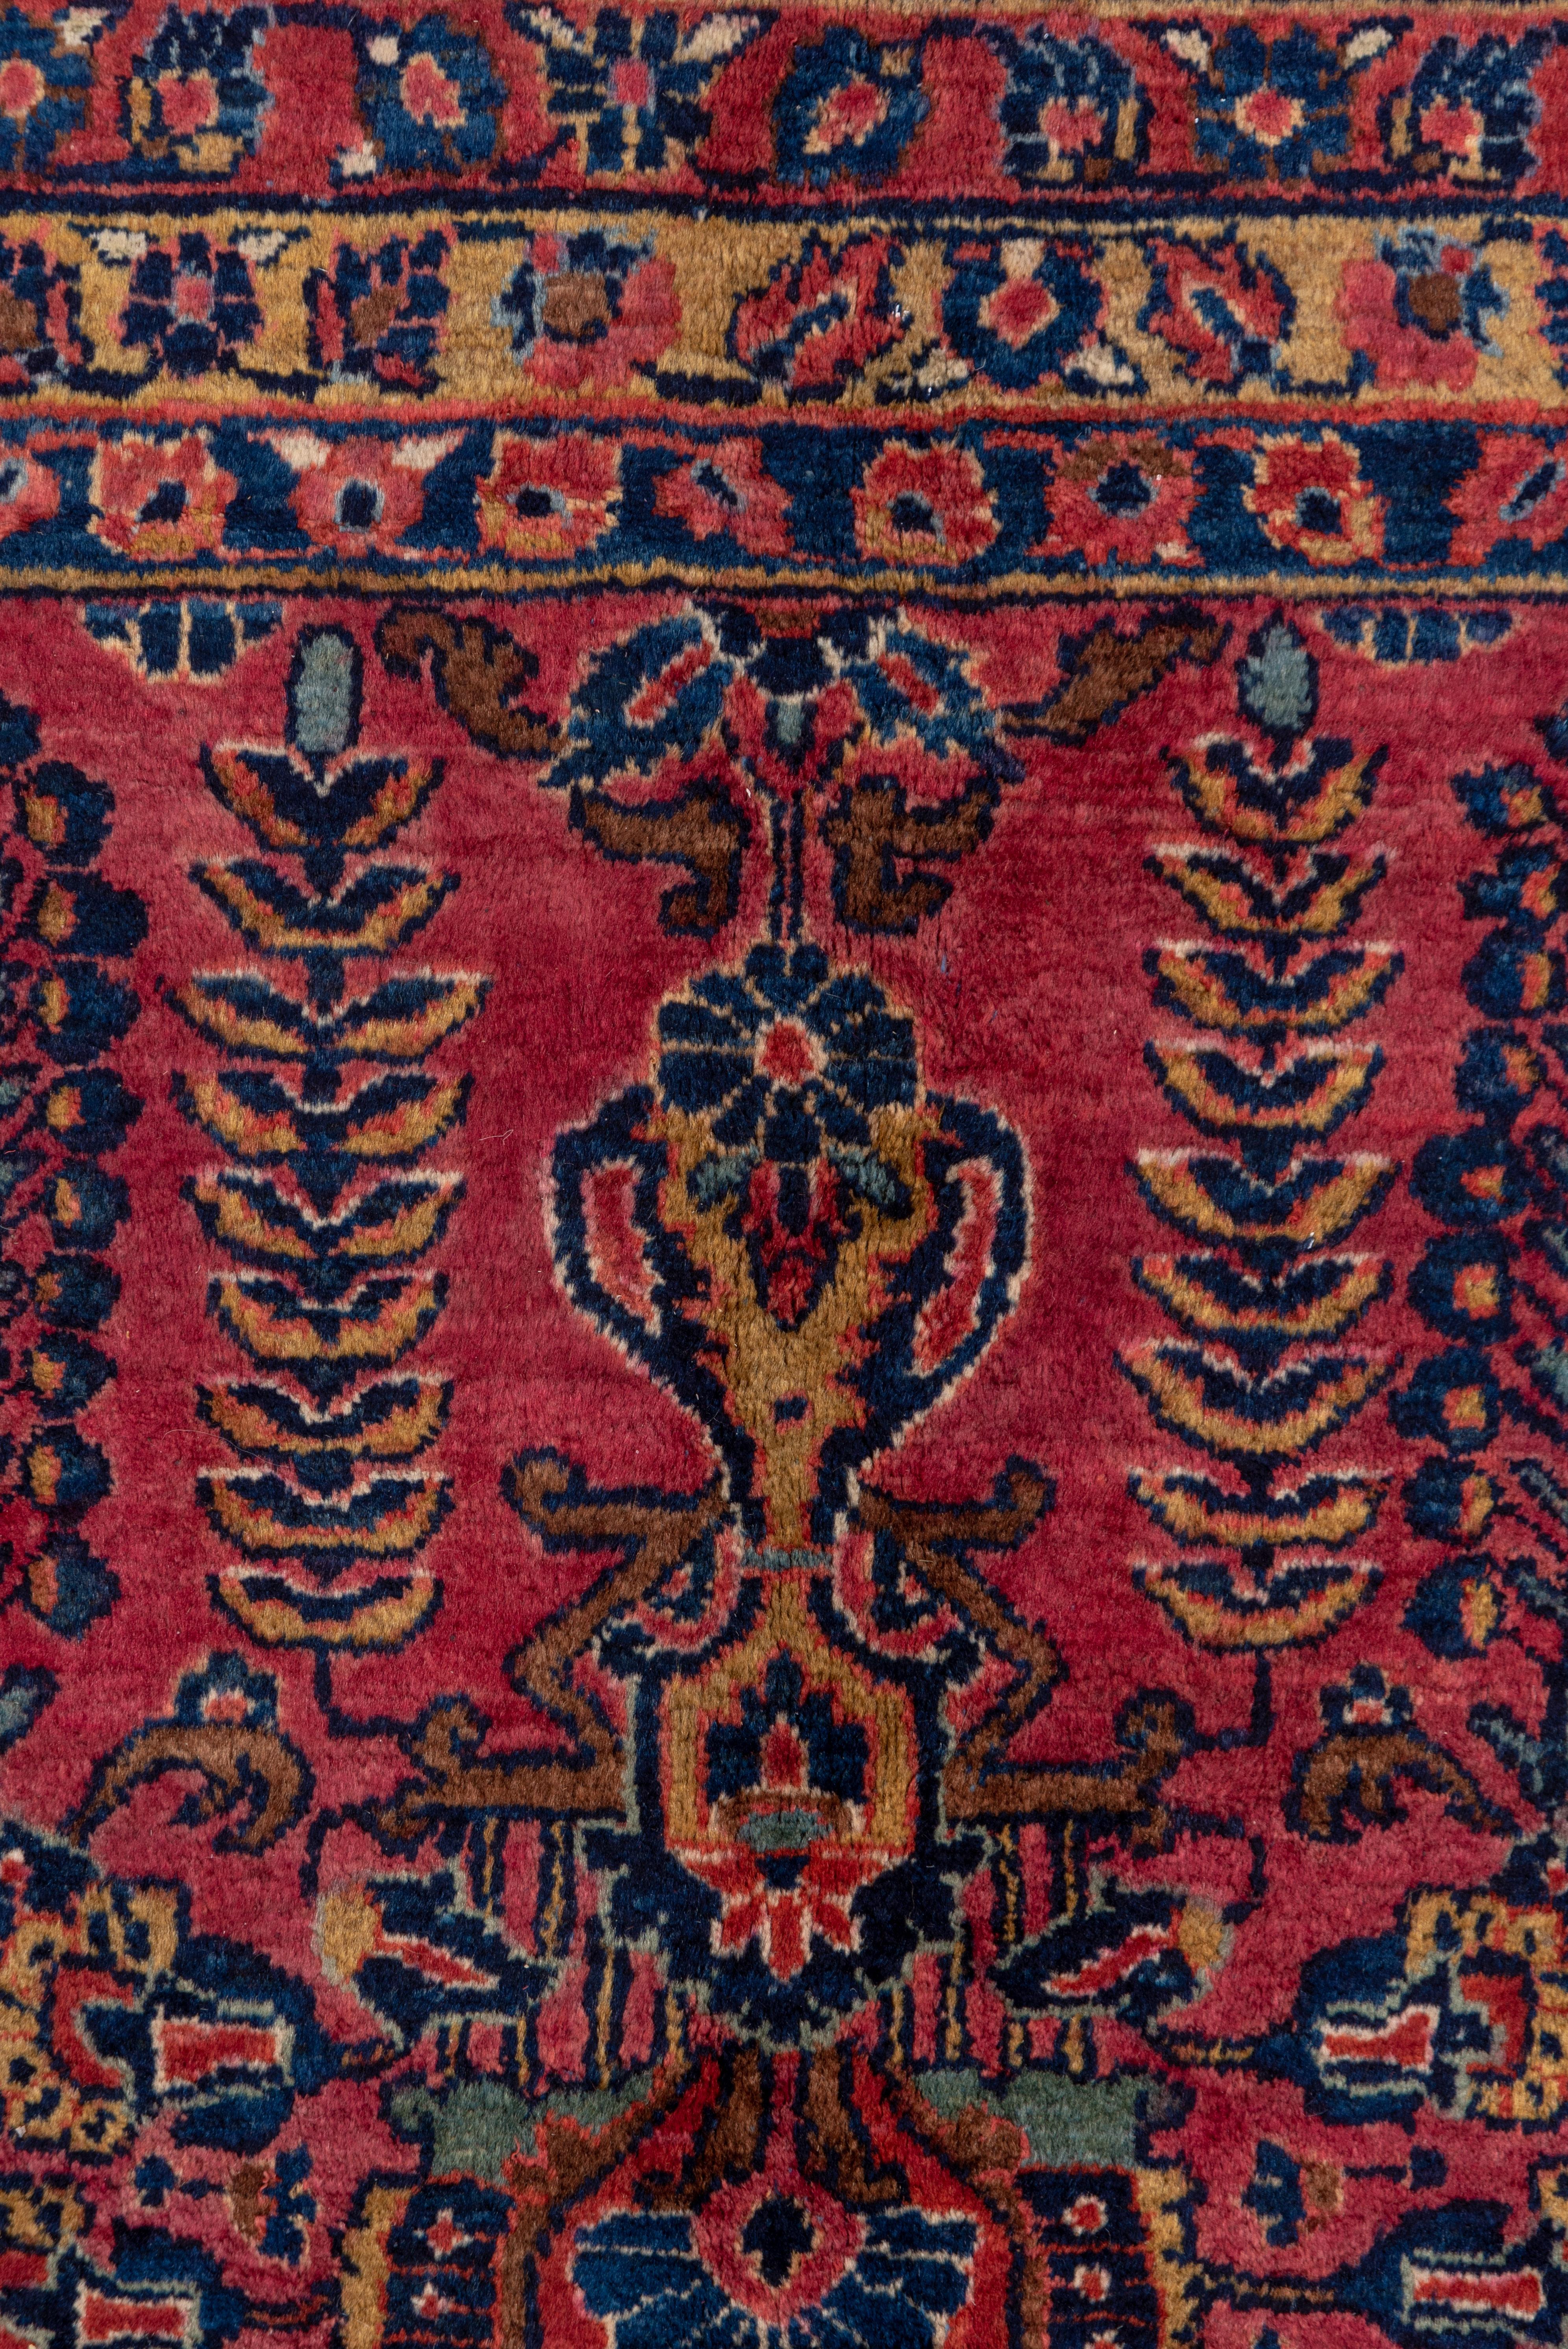 Antique Persian Sarouk Rug, Bright Red Field, Gold and Blue Accents, Medium Pile In Good Condition For Sale In New York, NY